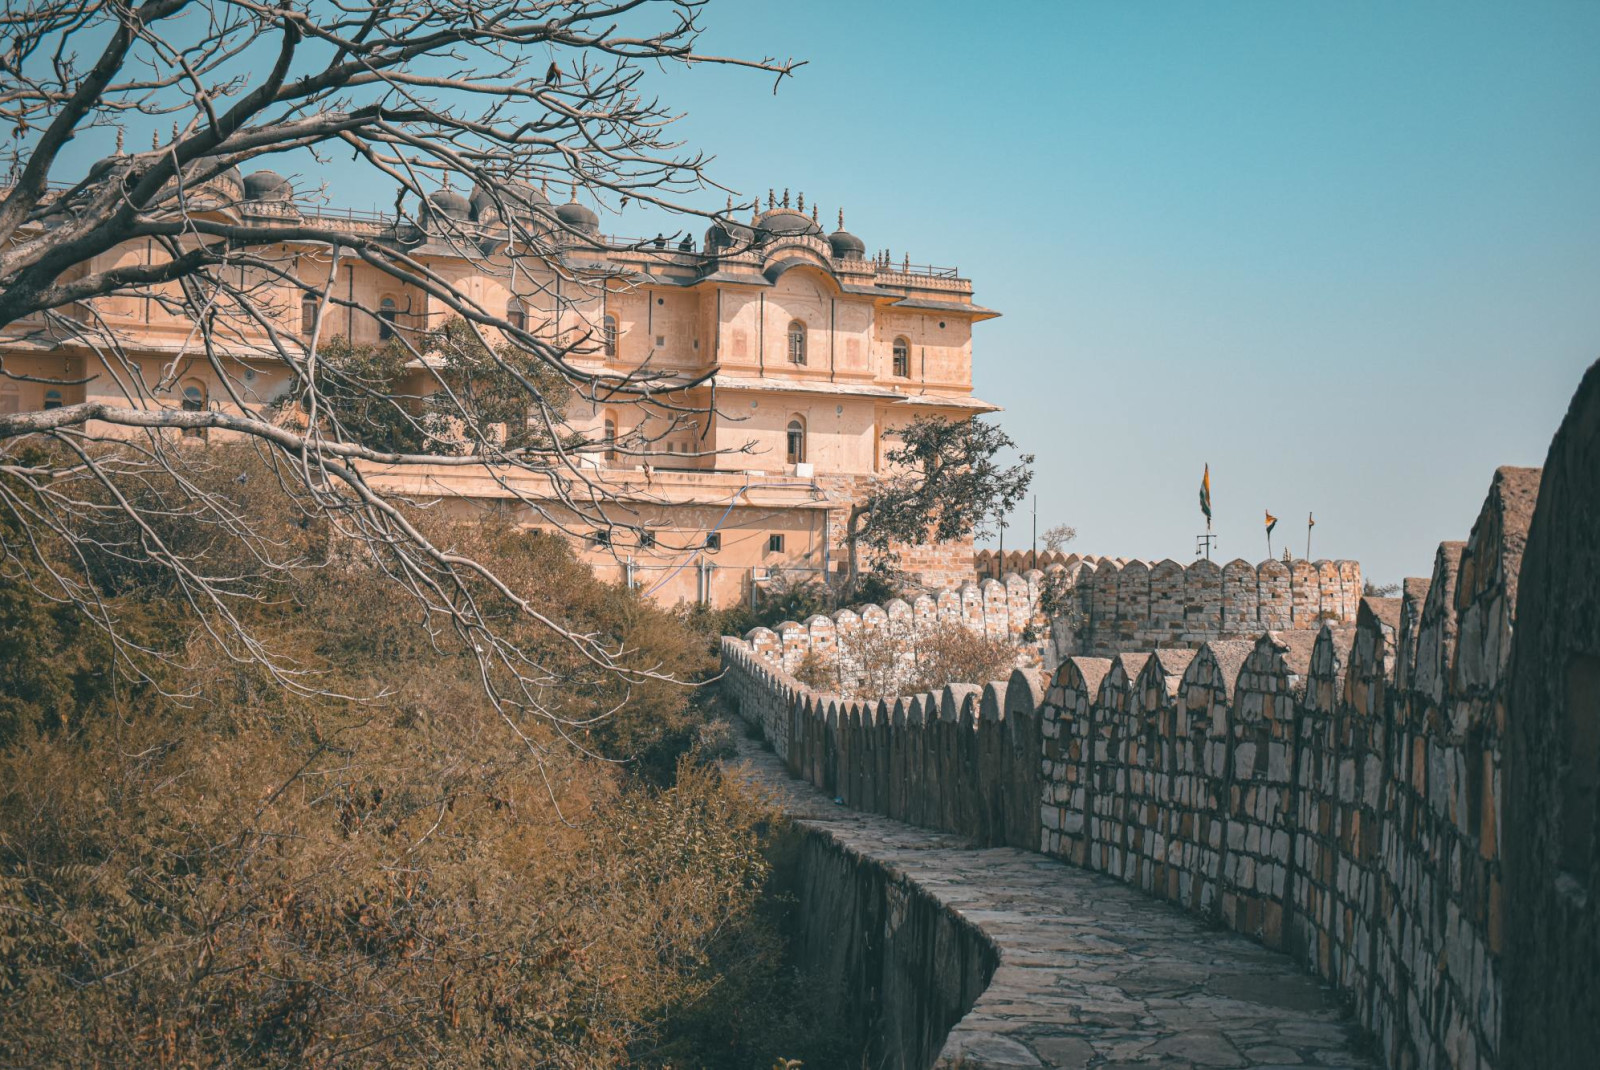 walkway and walls leading to Nahargarh Fort, a sought-out palace, in Jaipur.